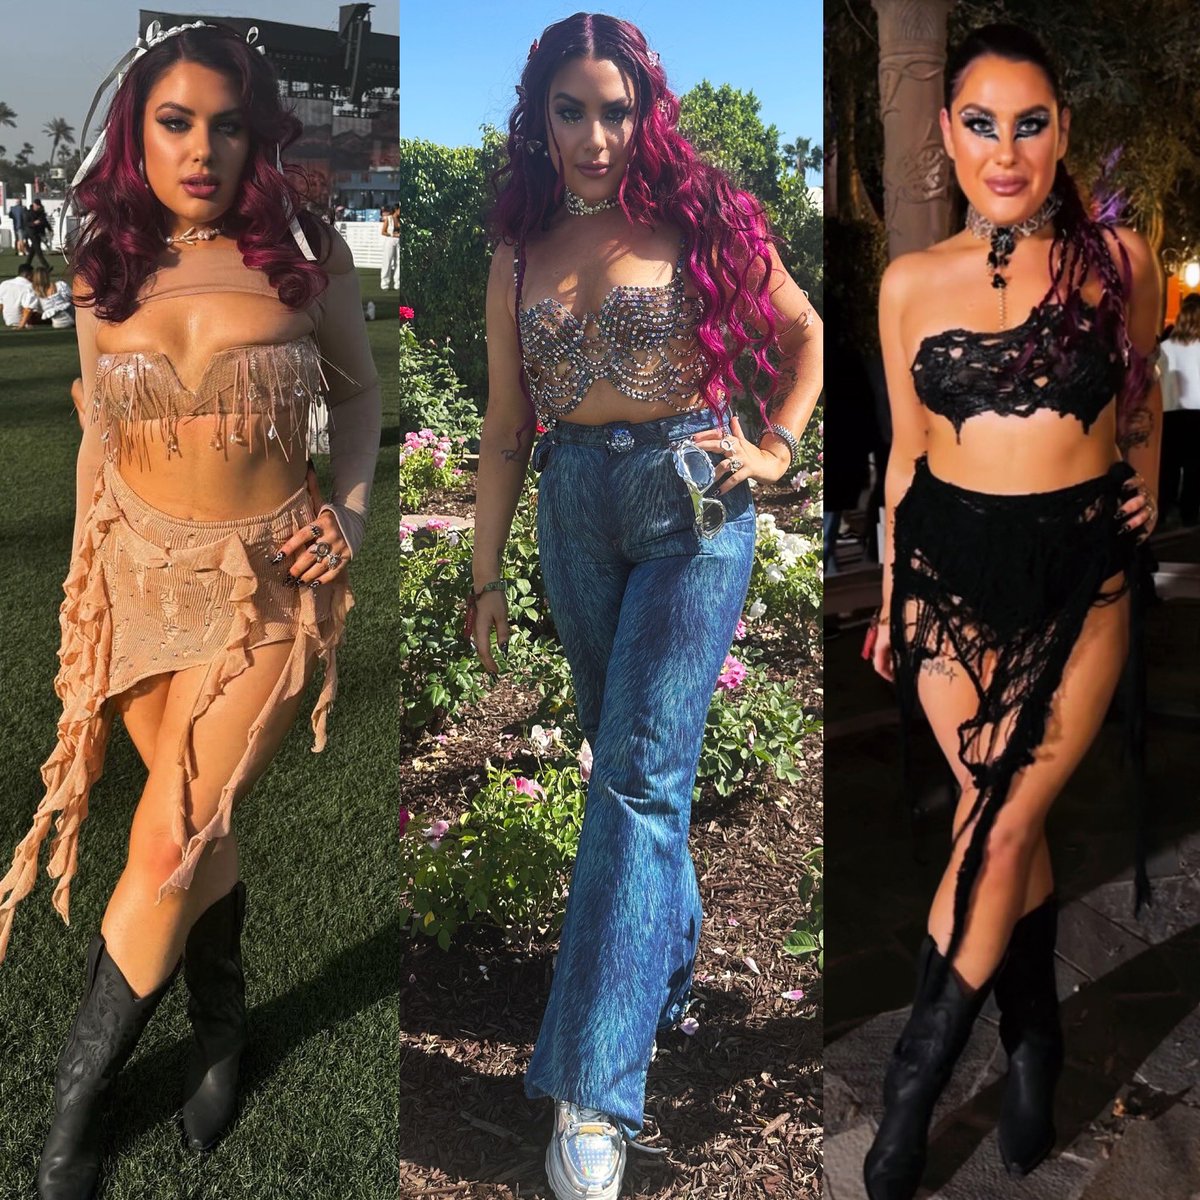 which #coachella fit was your fav? 🎡 

1. coquette 
2. Y2K 
3. Goth rave girl